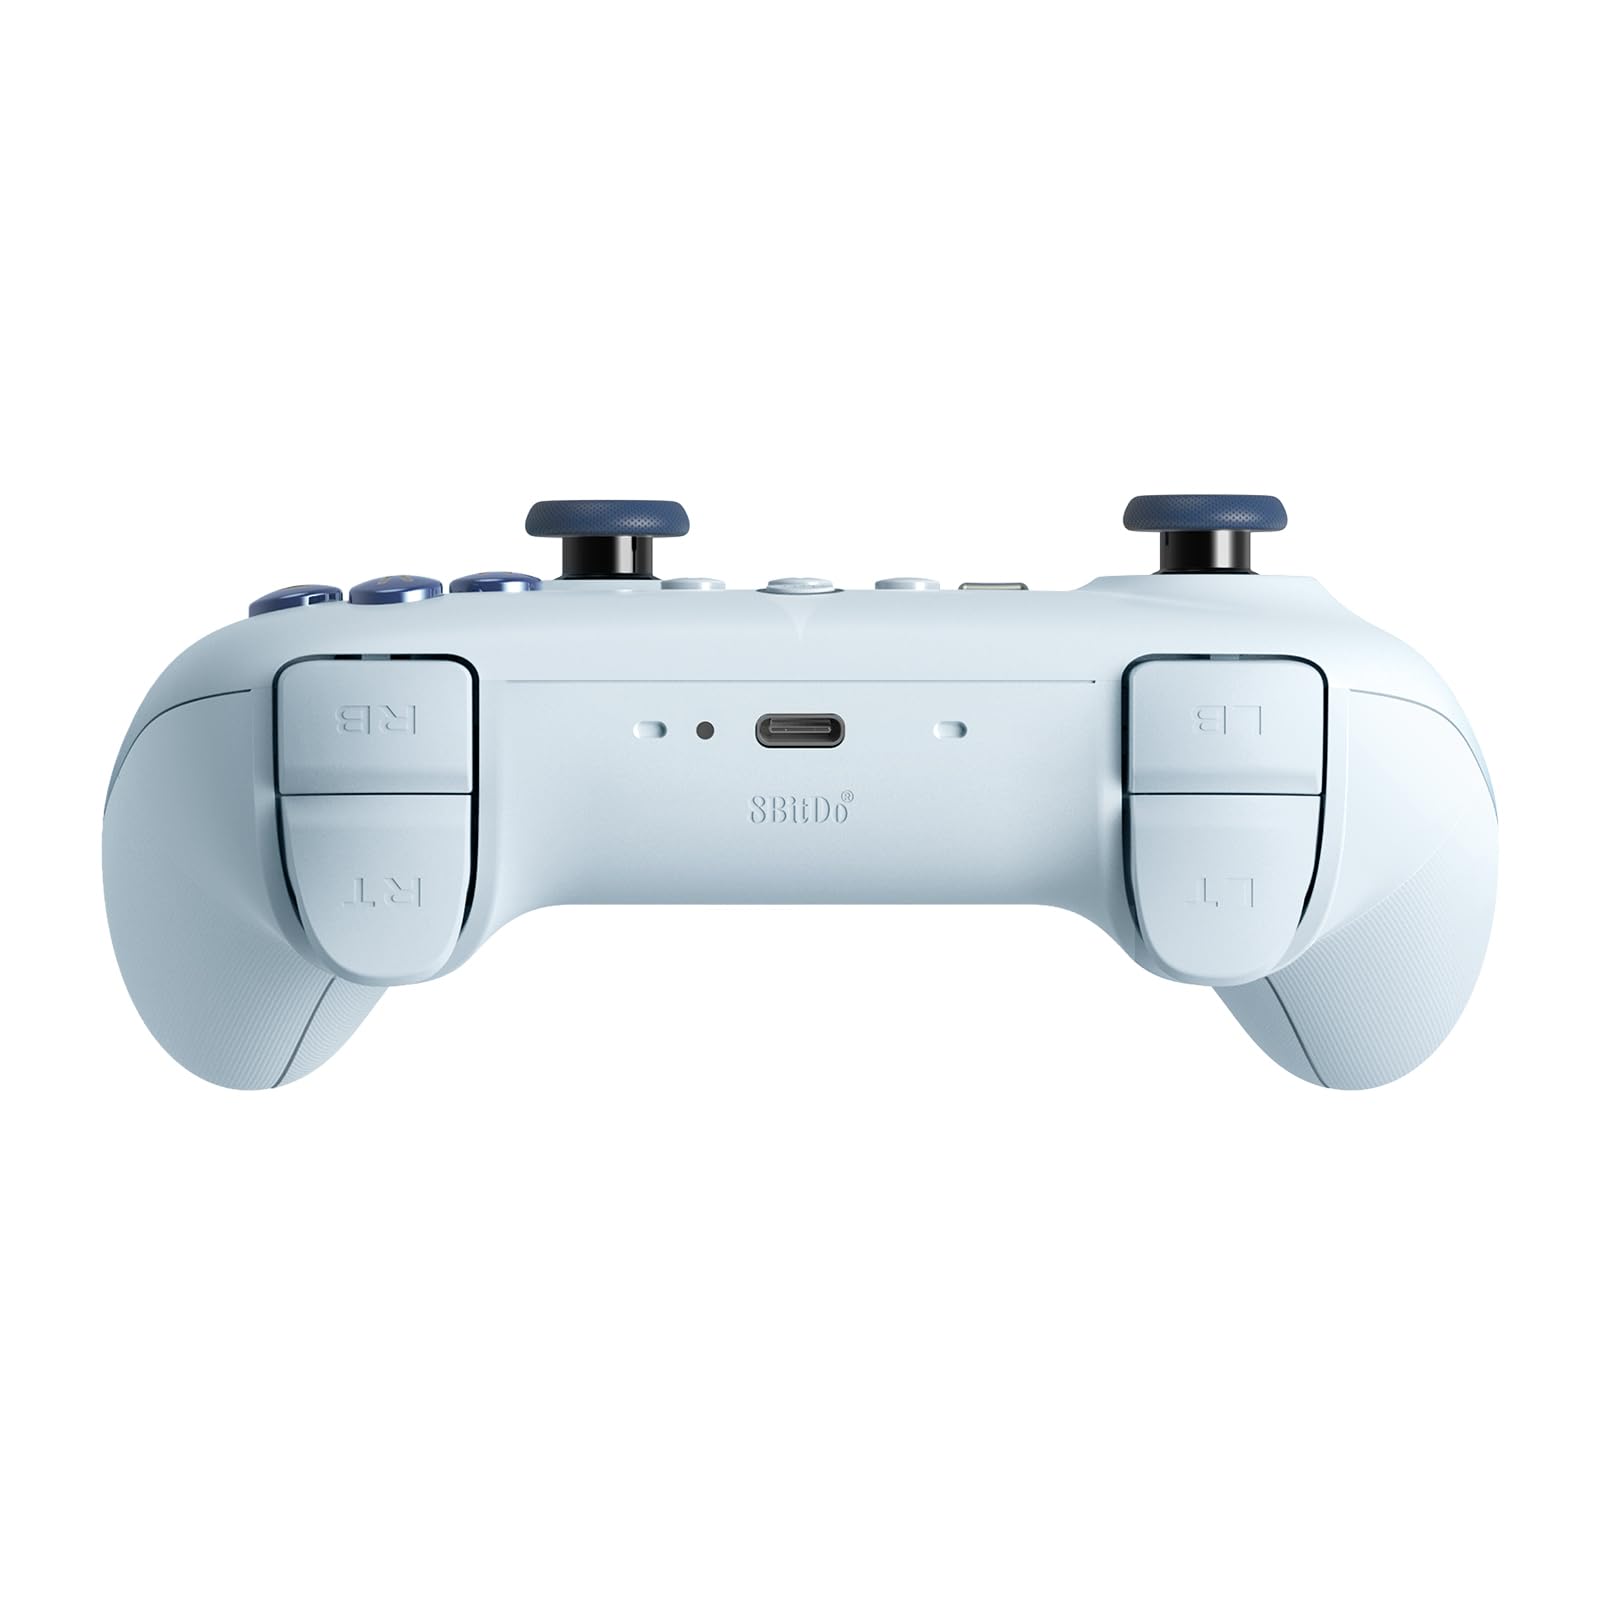 8Bitdo Ultimate 2.4G Wireless Controller for PC, Android, Steam Deck, and Apple - Chongyun Edition (Officially Licensed by Genshin Impact)